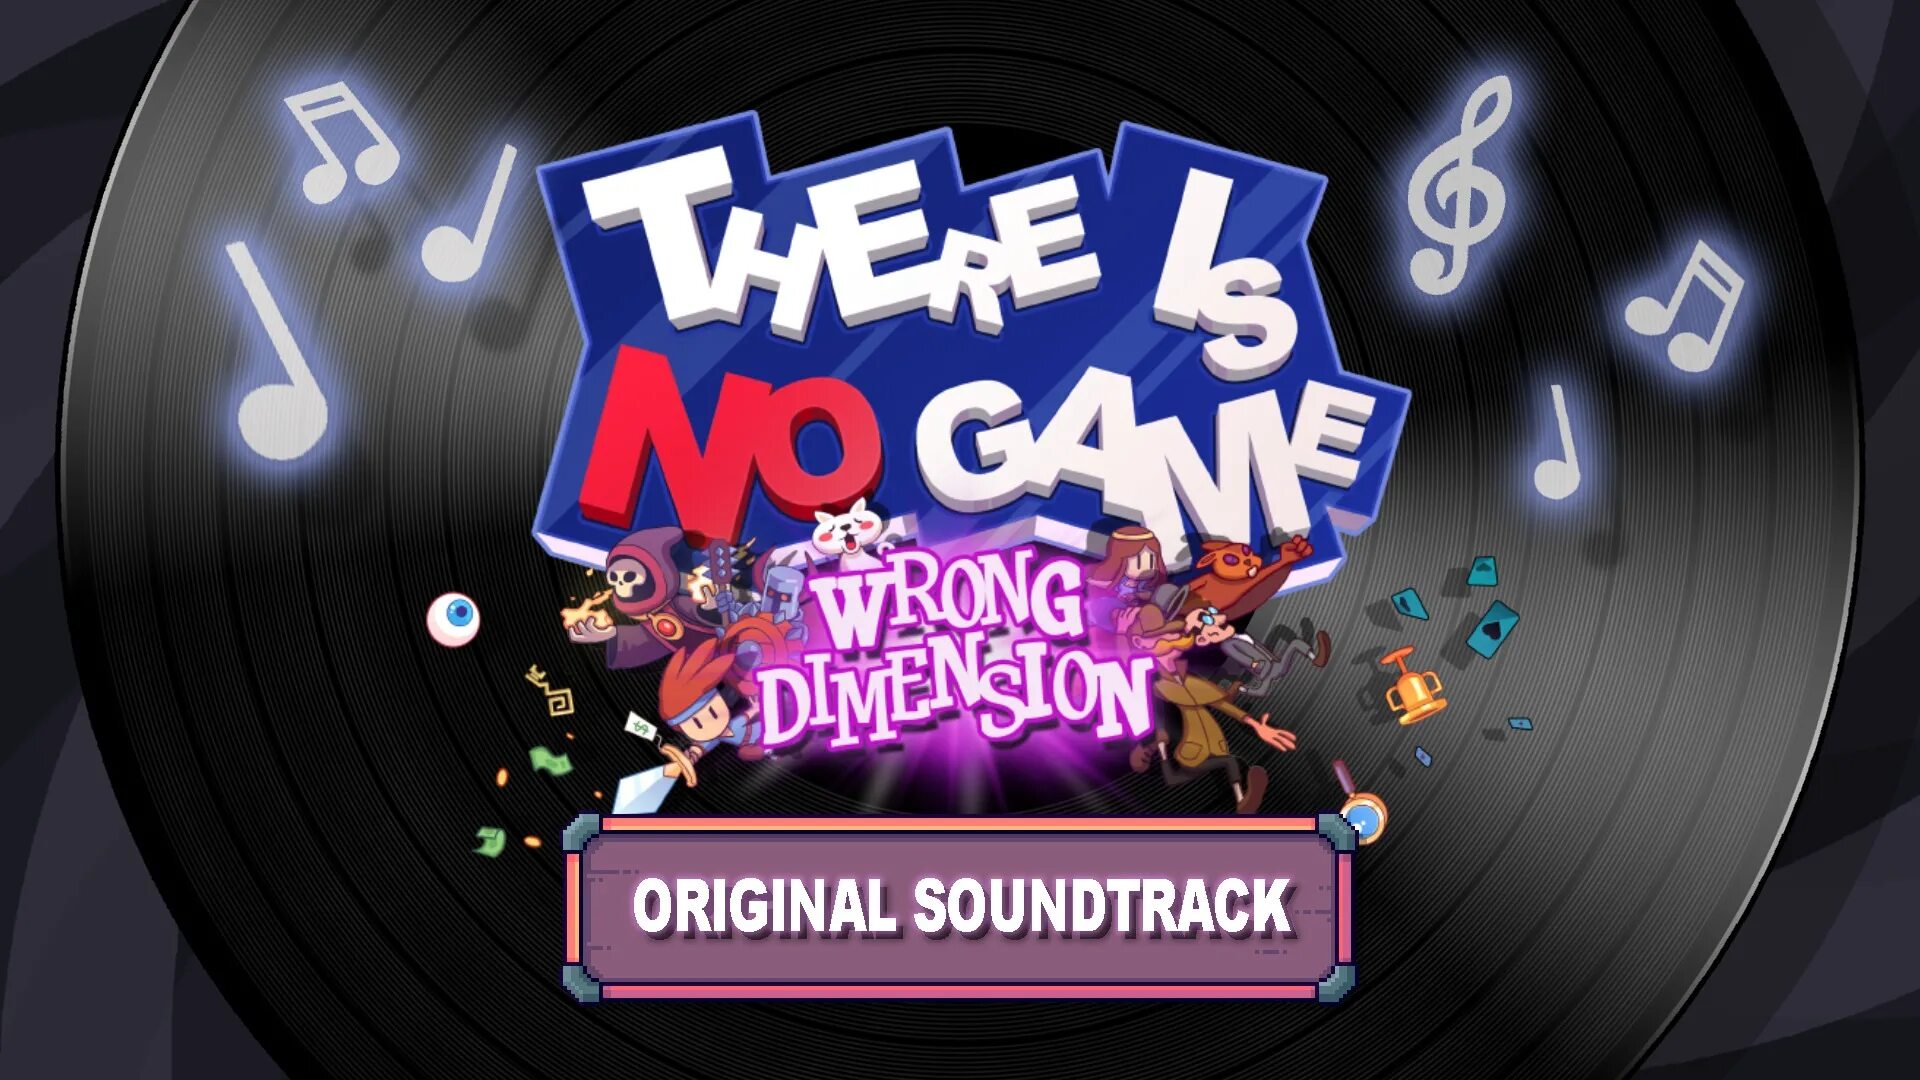 There is no game: wrong Dimension. There is no game: wrong Dimension игра. Erroneous игры. There is no game wrong Dimension — DJ game. Wrong dimension